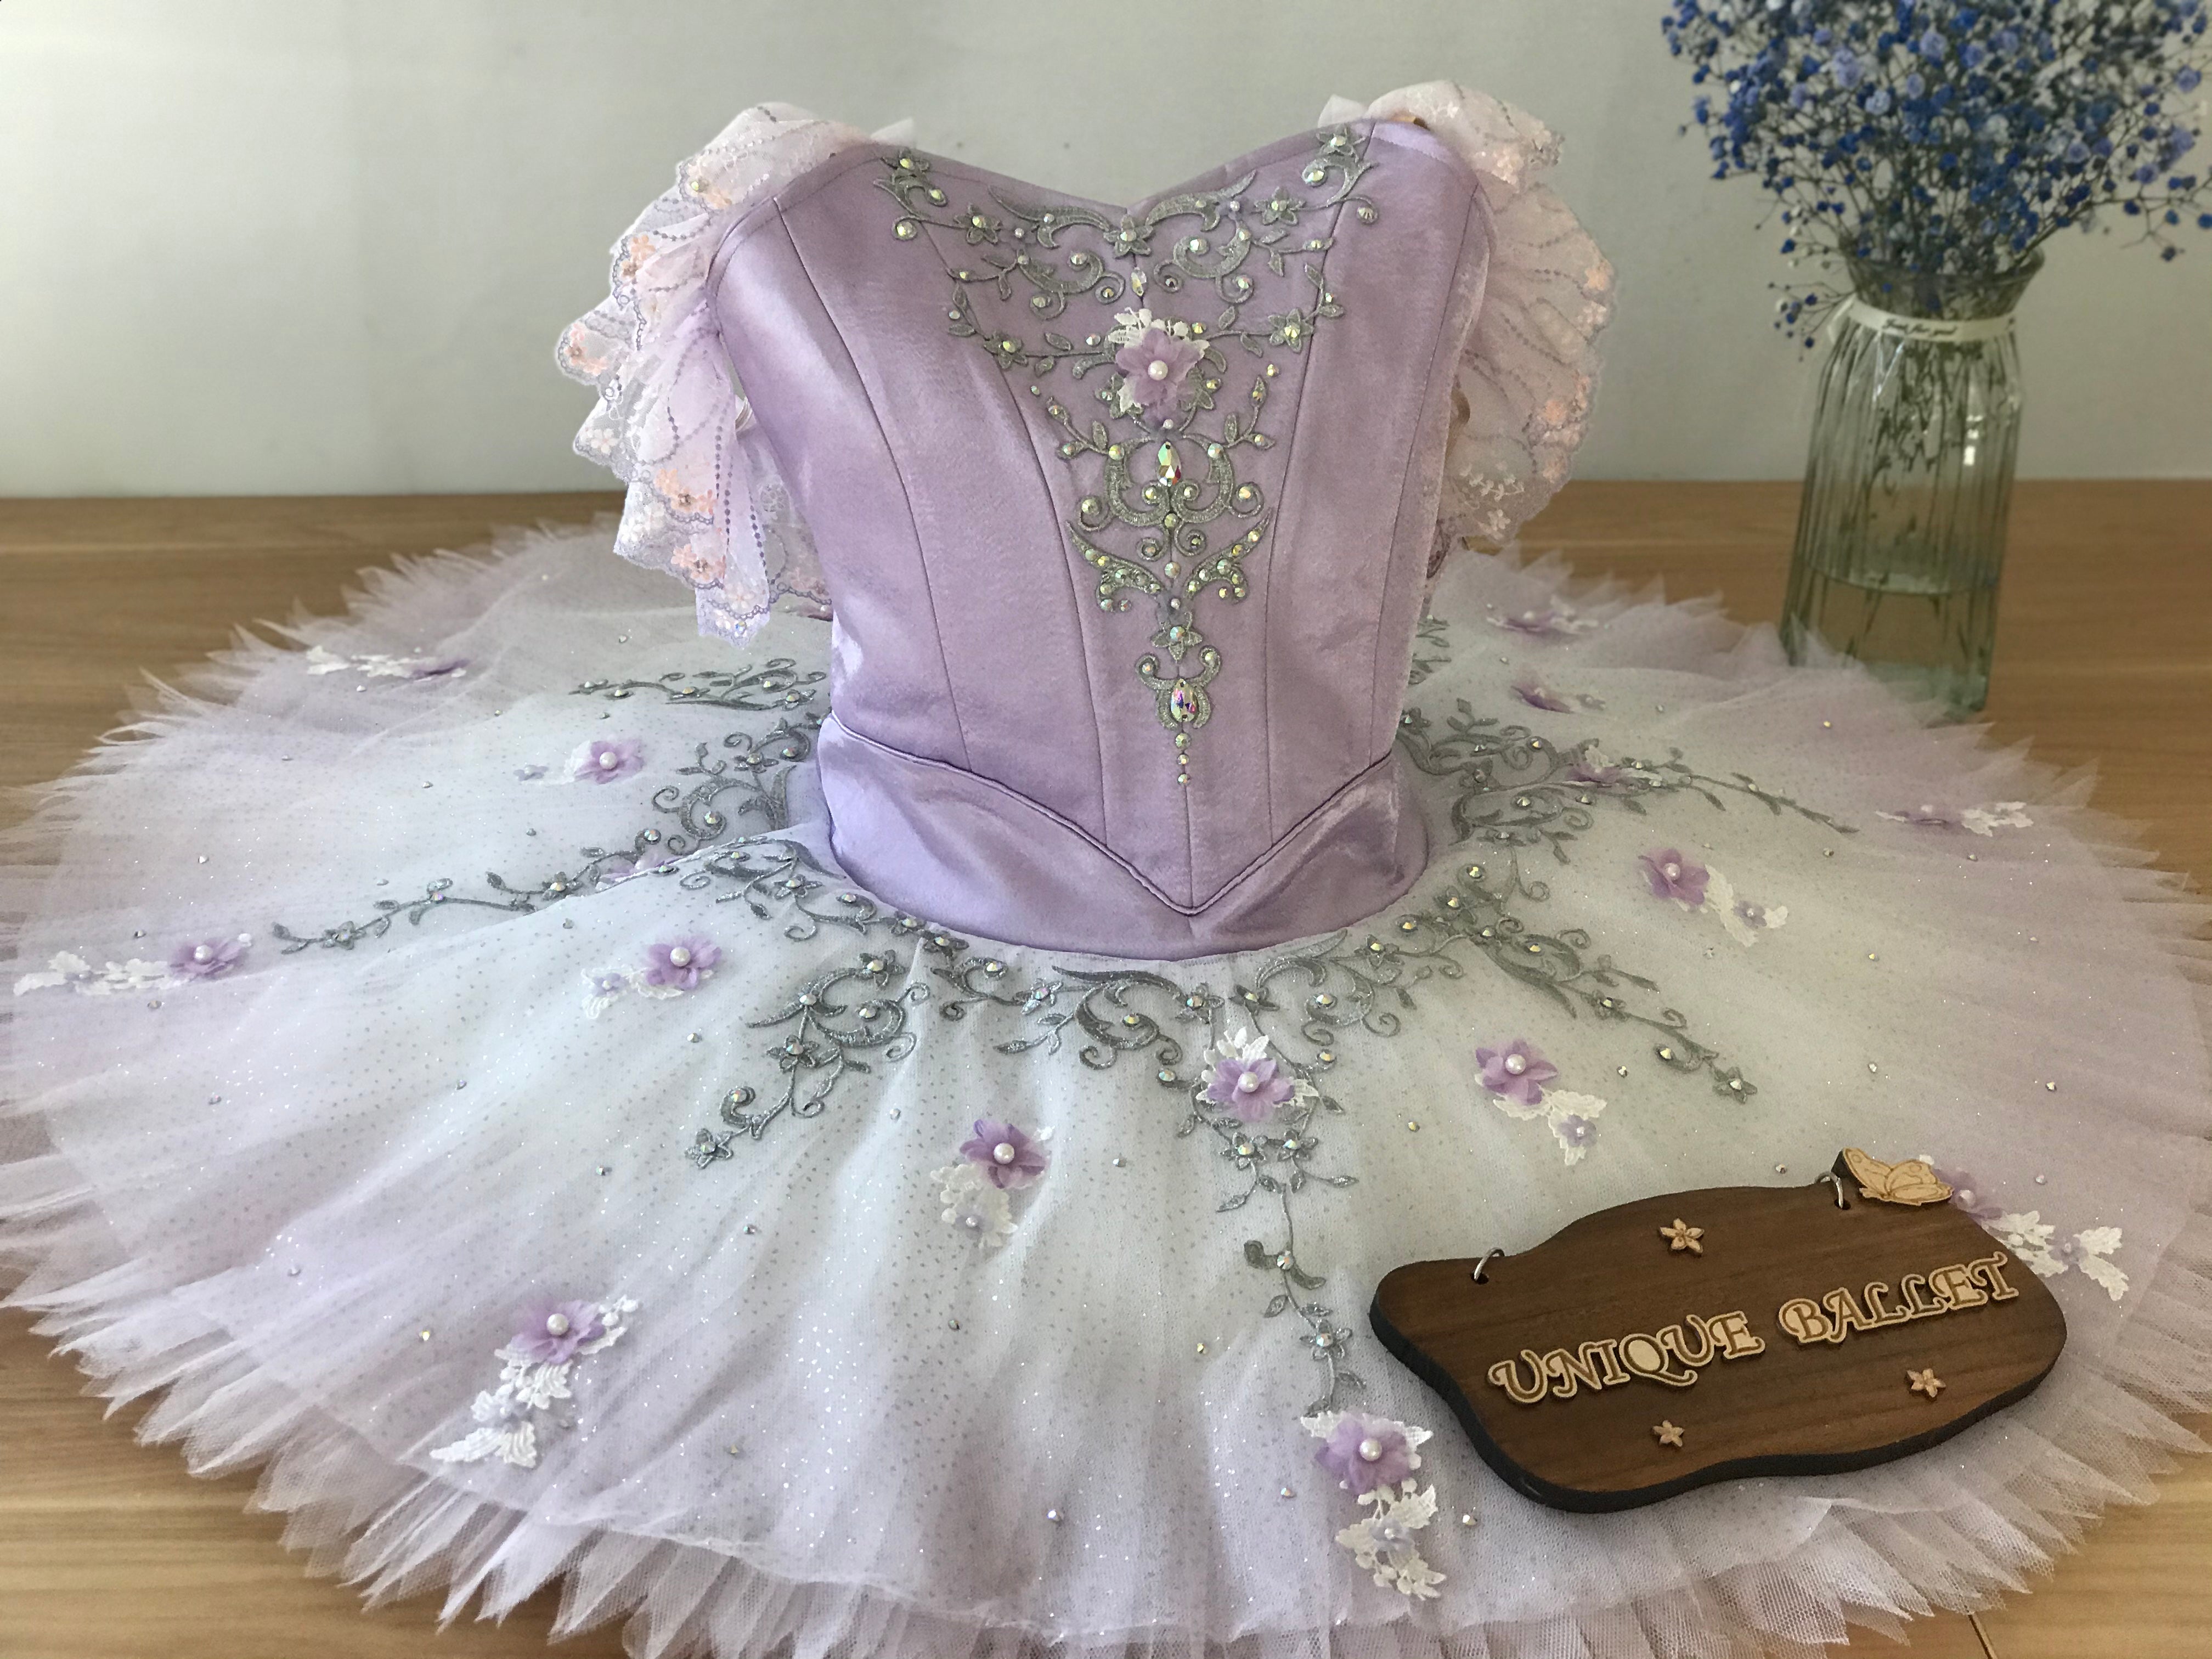 Professional Lilac Fairy Gradient Classic Ballet Costume Stage Platter Tutu YAGP Costume With Hooks